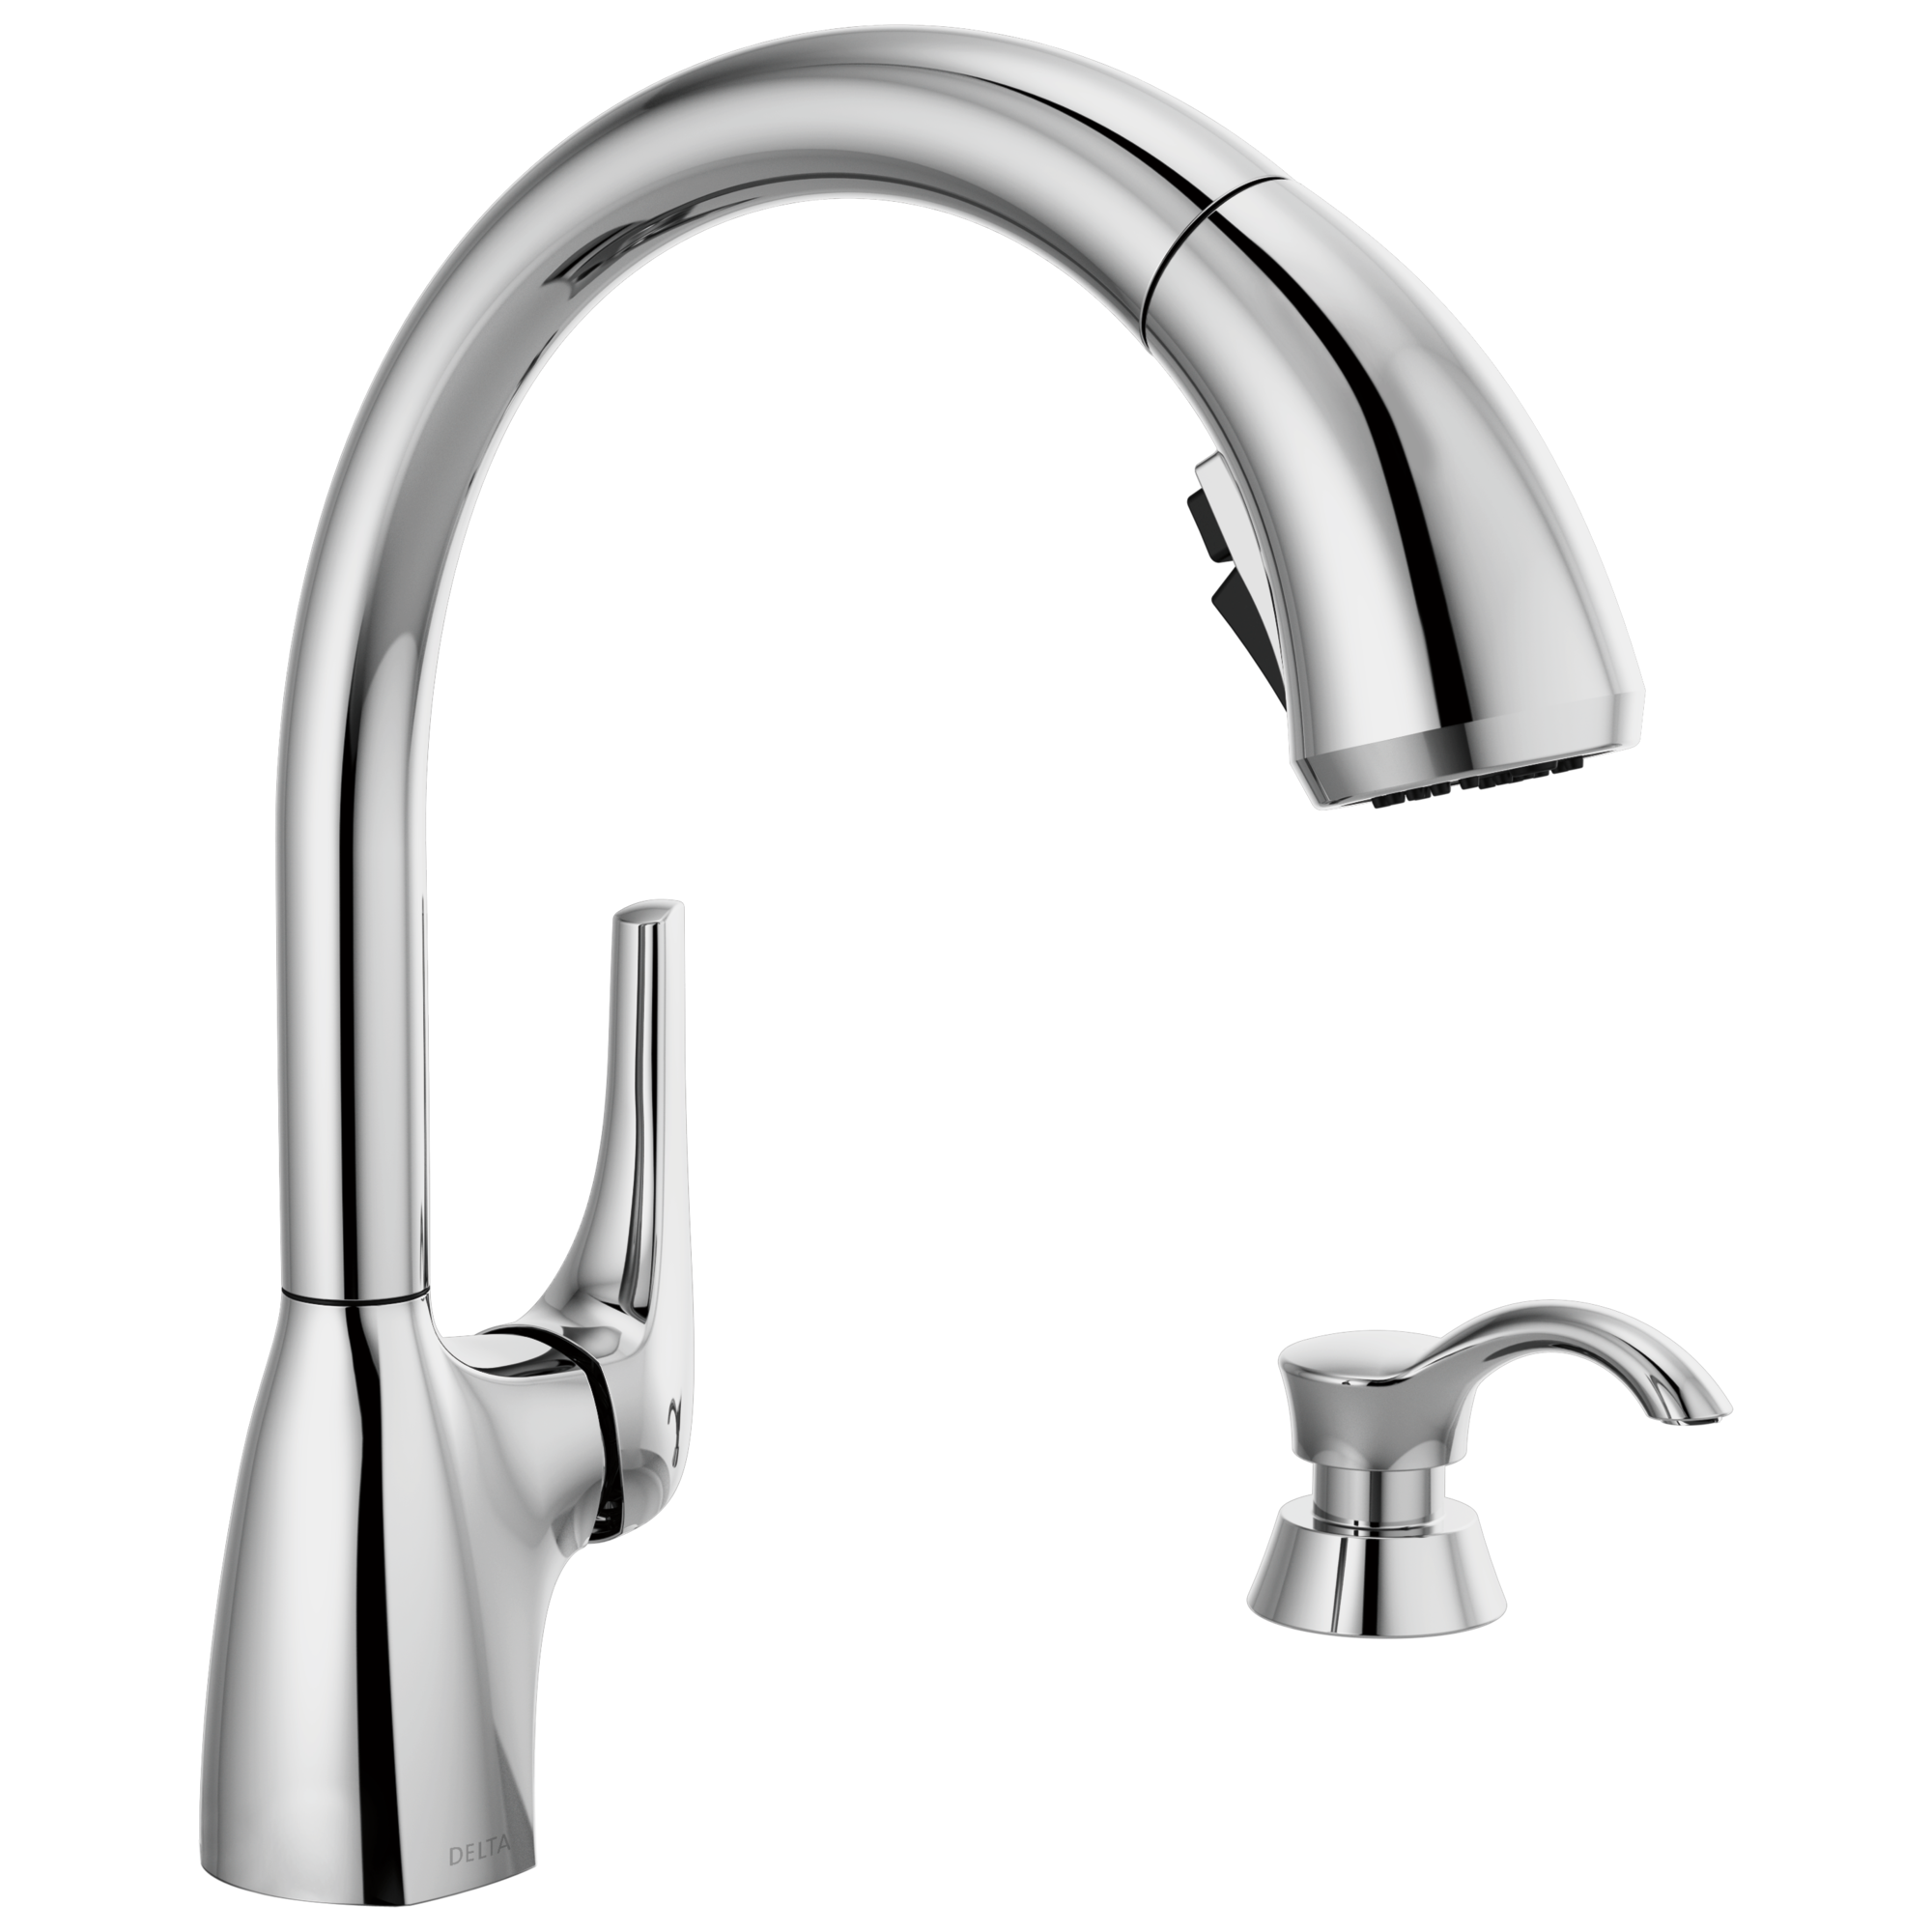 Tilden Chrome Single Handle Pull-out Kitchen Faucet with Deck Plate and Soap Dispenser Included Rubber | - Delta 19794Z-SD-DST